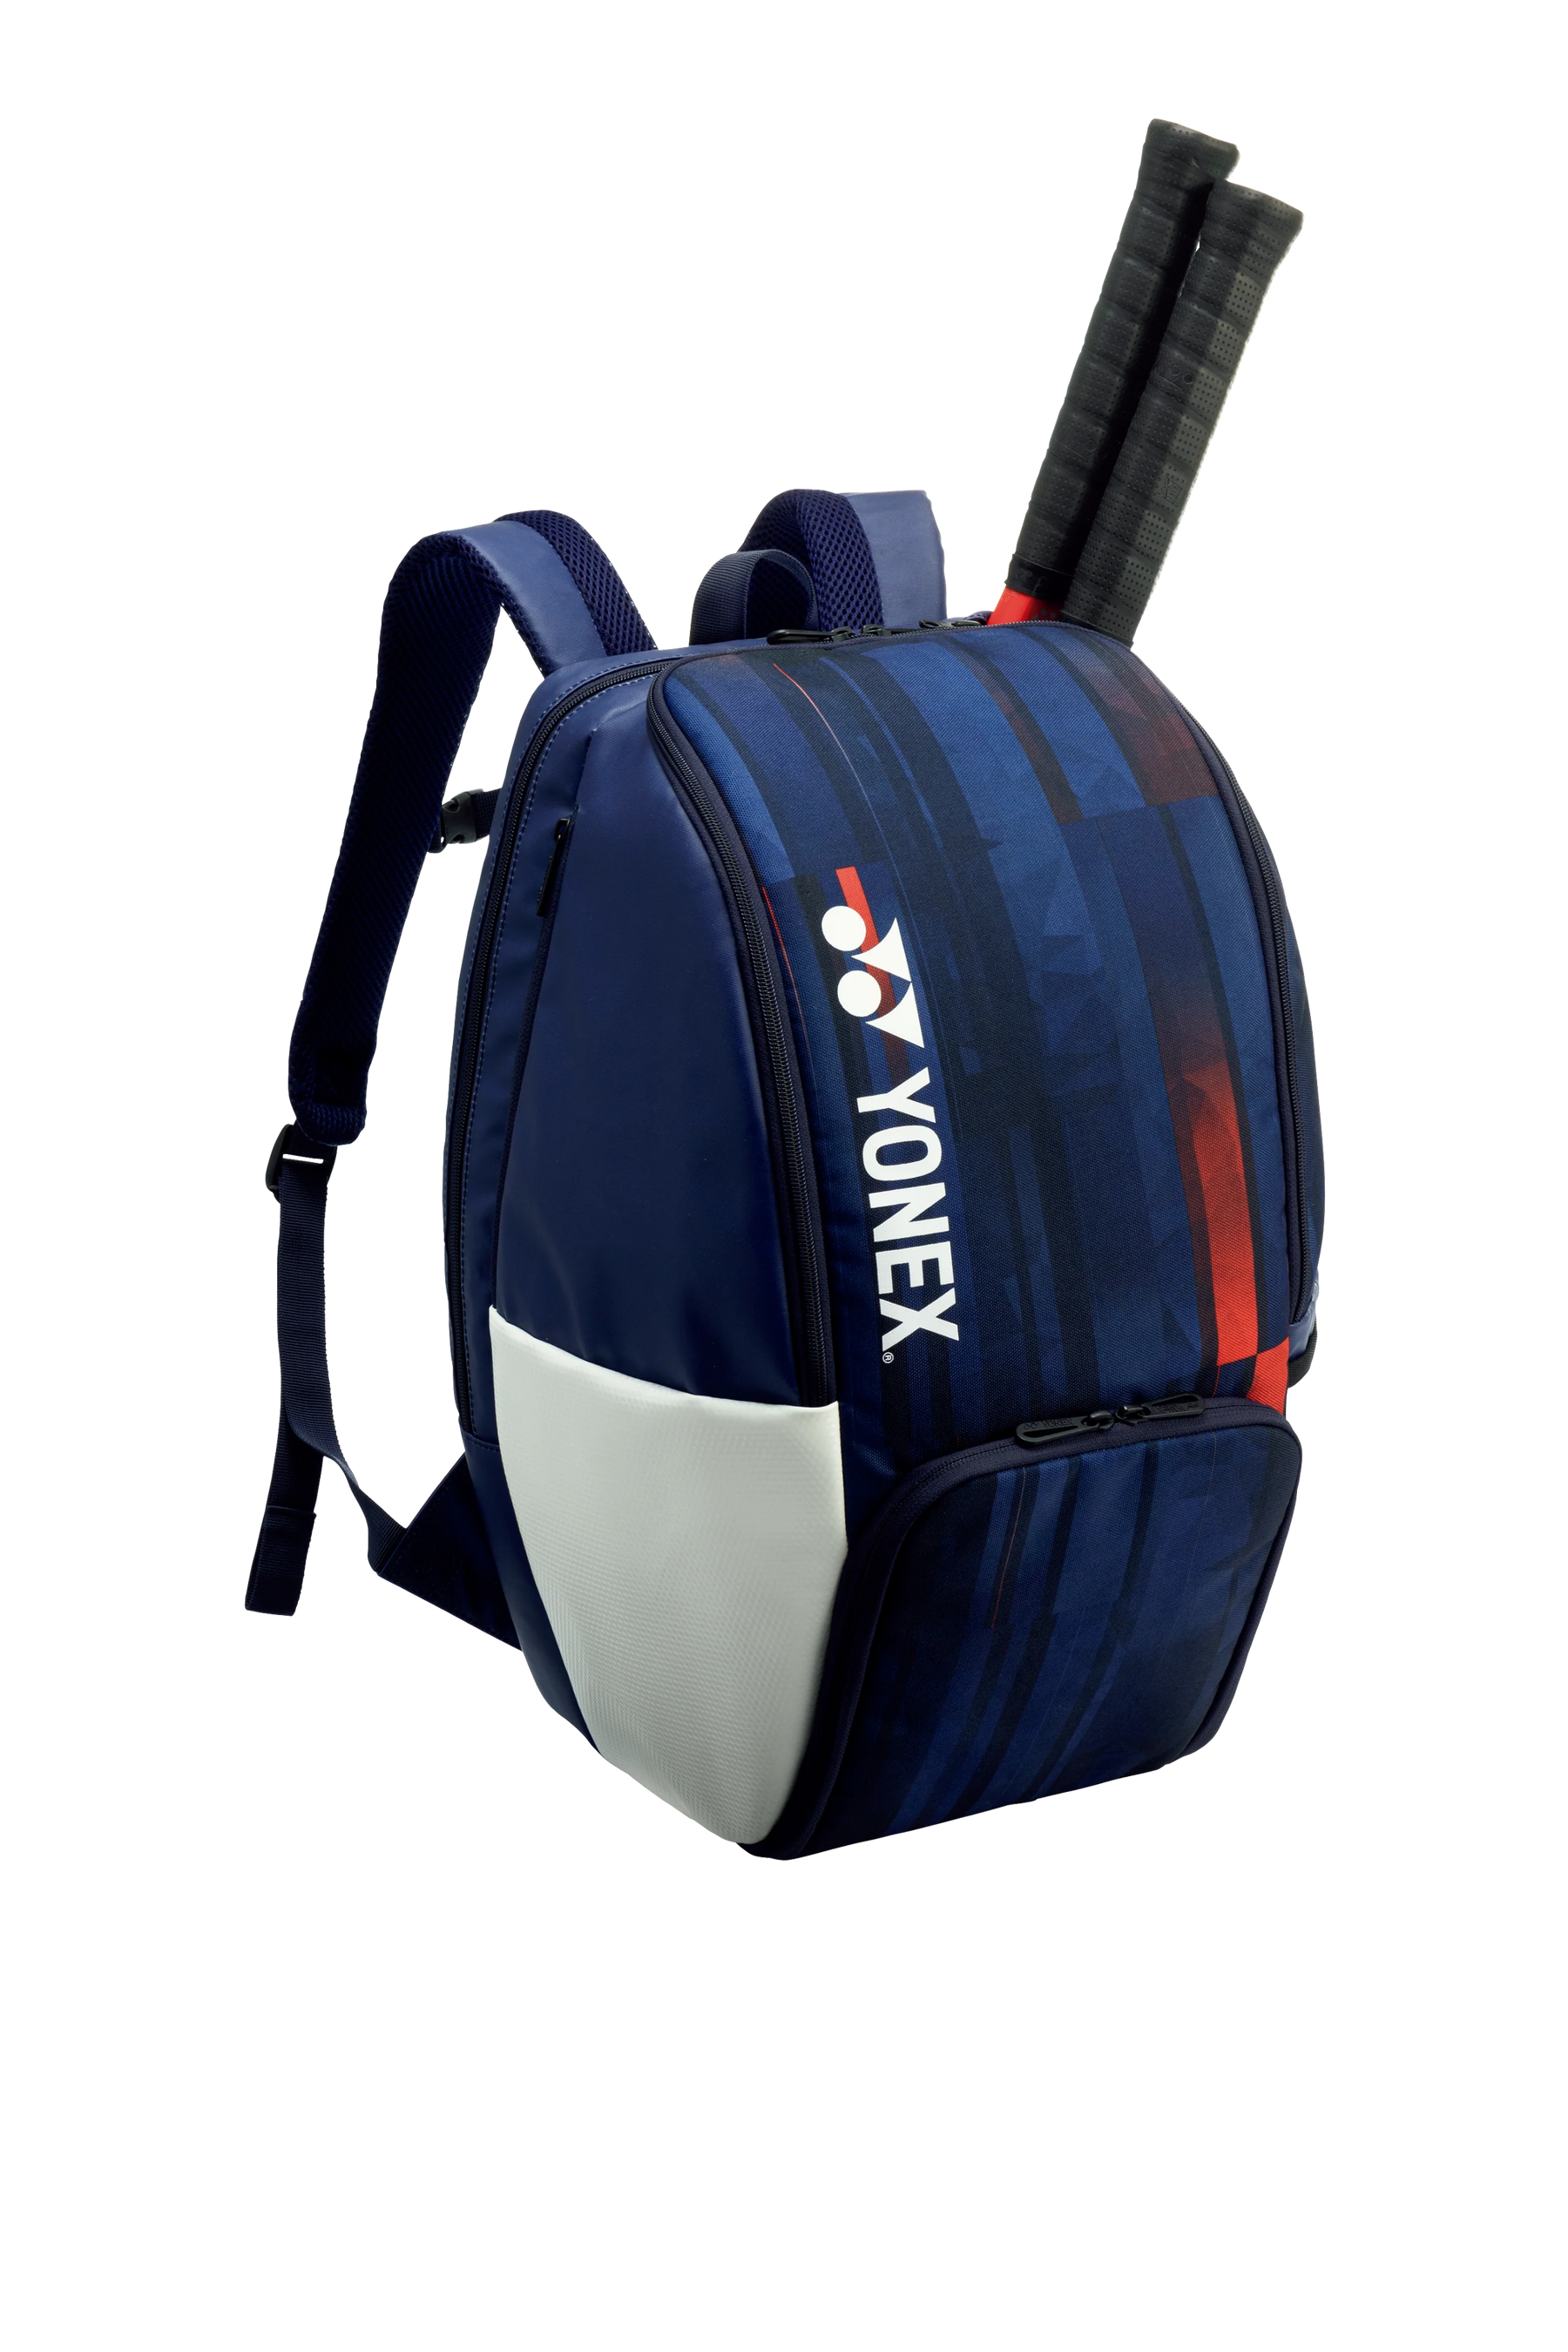 Yonex BA12PALD Limited Pro Backpack (White/Navy/Red)